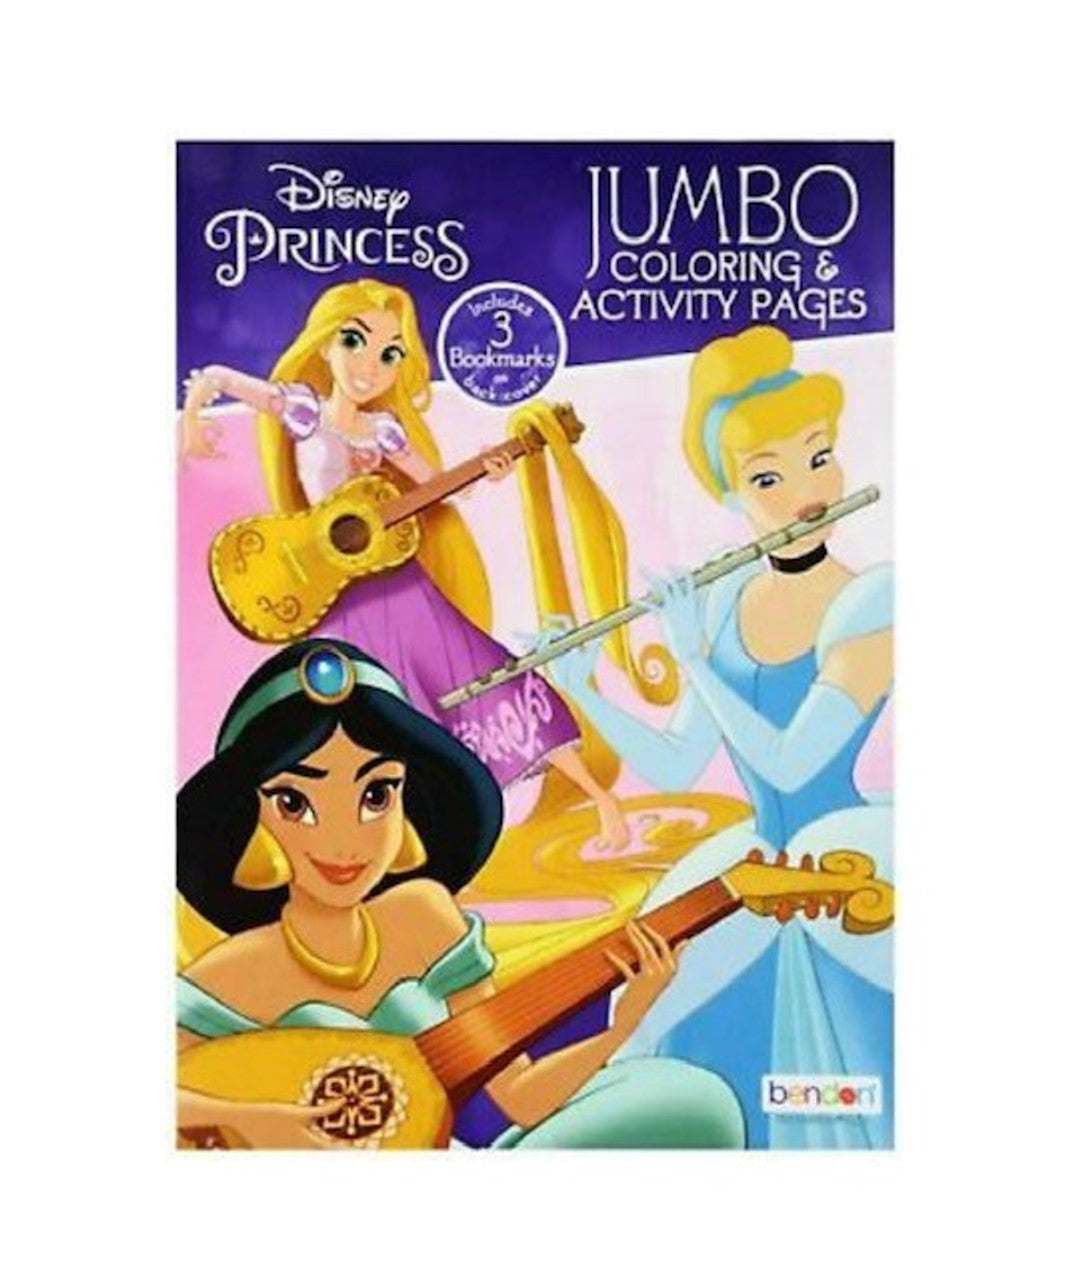 Disney Princess Coloring and Activity Book Set for Girls - Jumbo Coloring  Bundle with 6 Princess Coloring Books with Stickers, Games, Puzzles